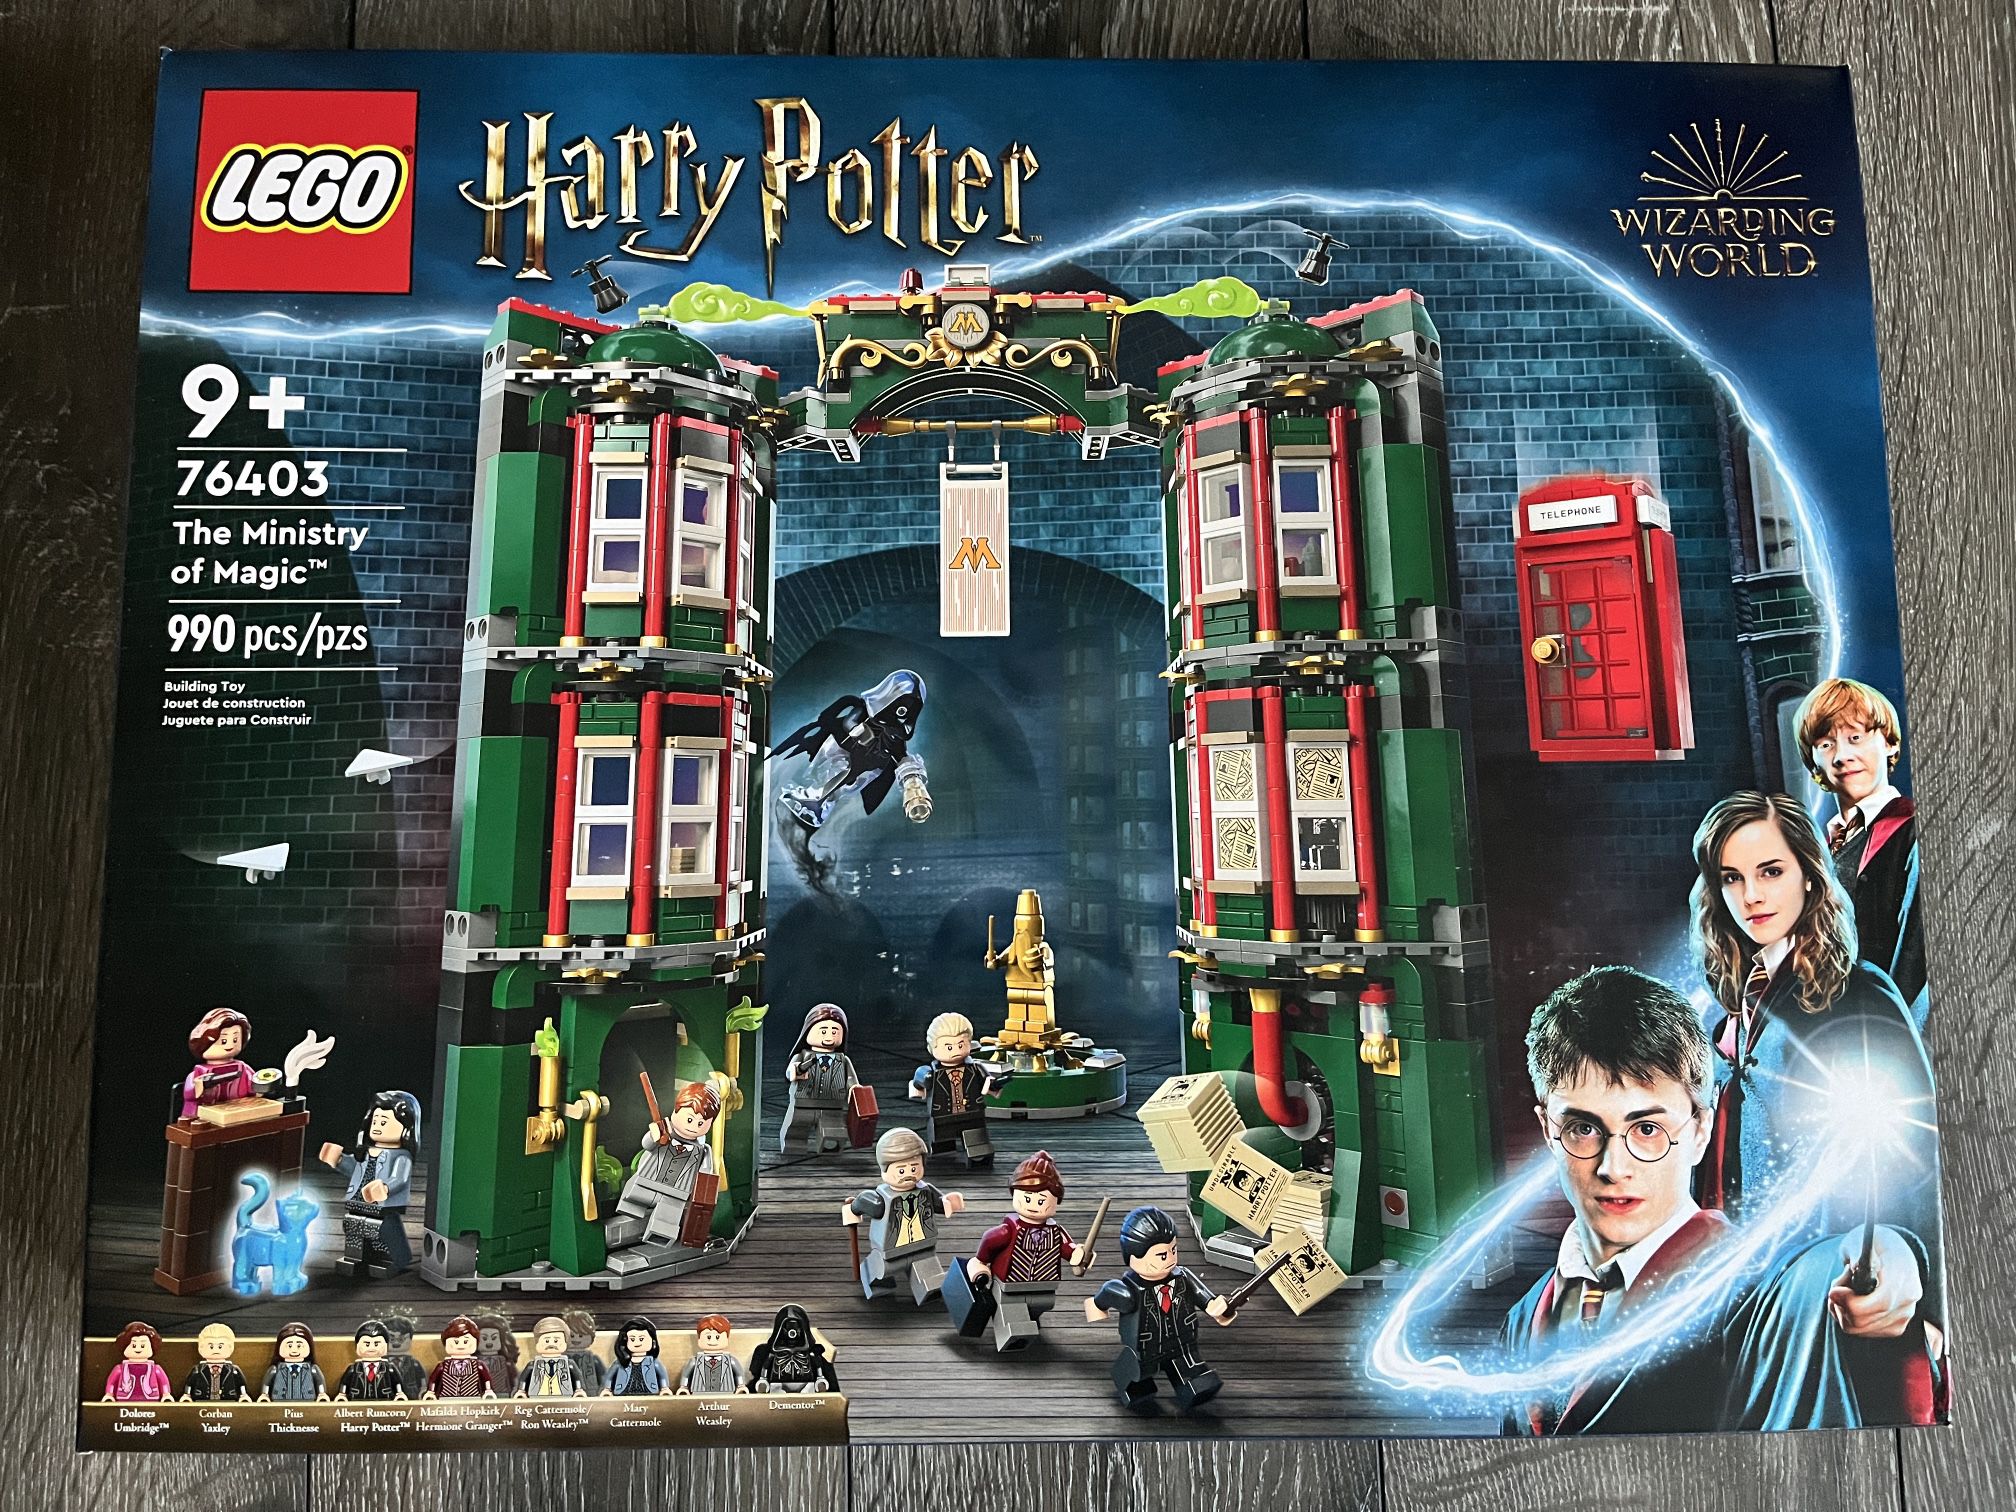 LEGO Harry Potter 76403 New  The Ministry of Magic